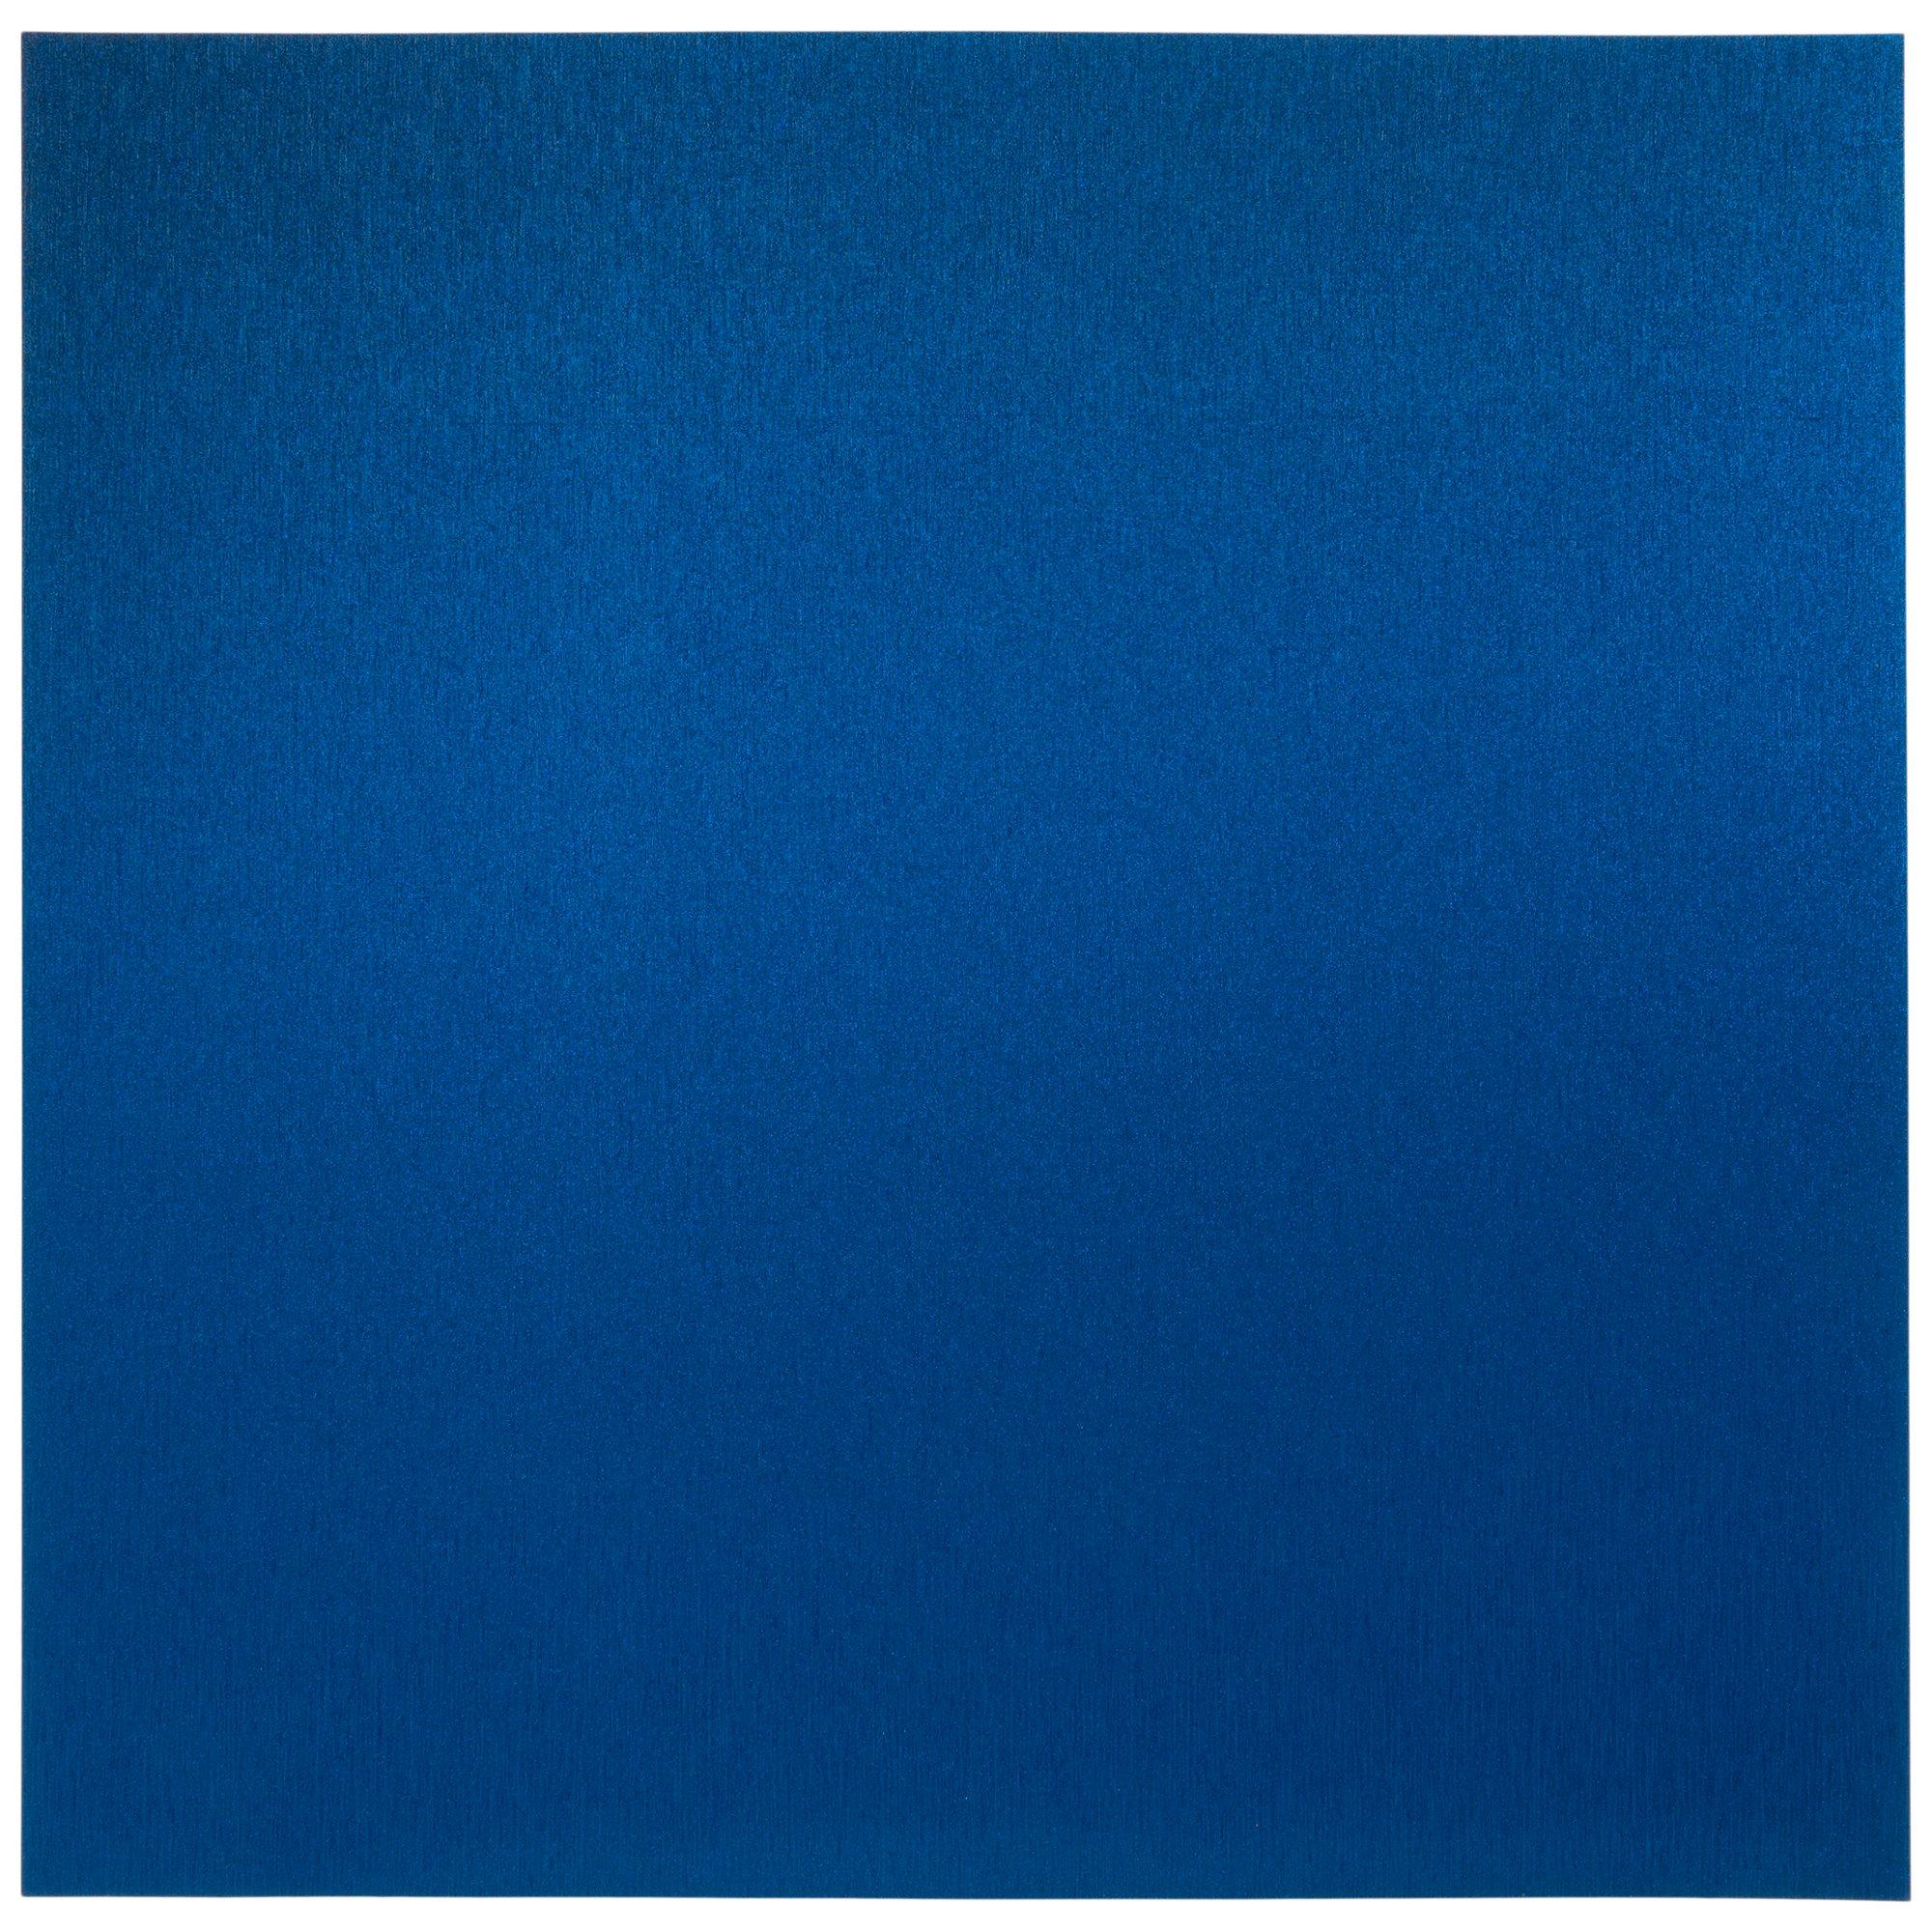  Hobby Lobby Die Cut Paper Studio Pack of 2 Blue Strong Grip  Adhesive Cutting Mats - 12 x 12 : Arts, Crafts & Sewing